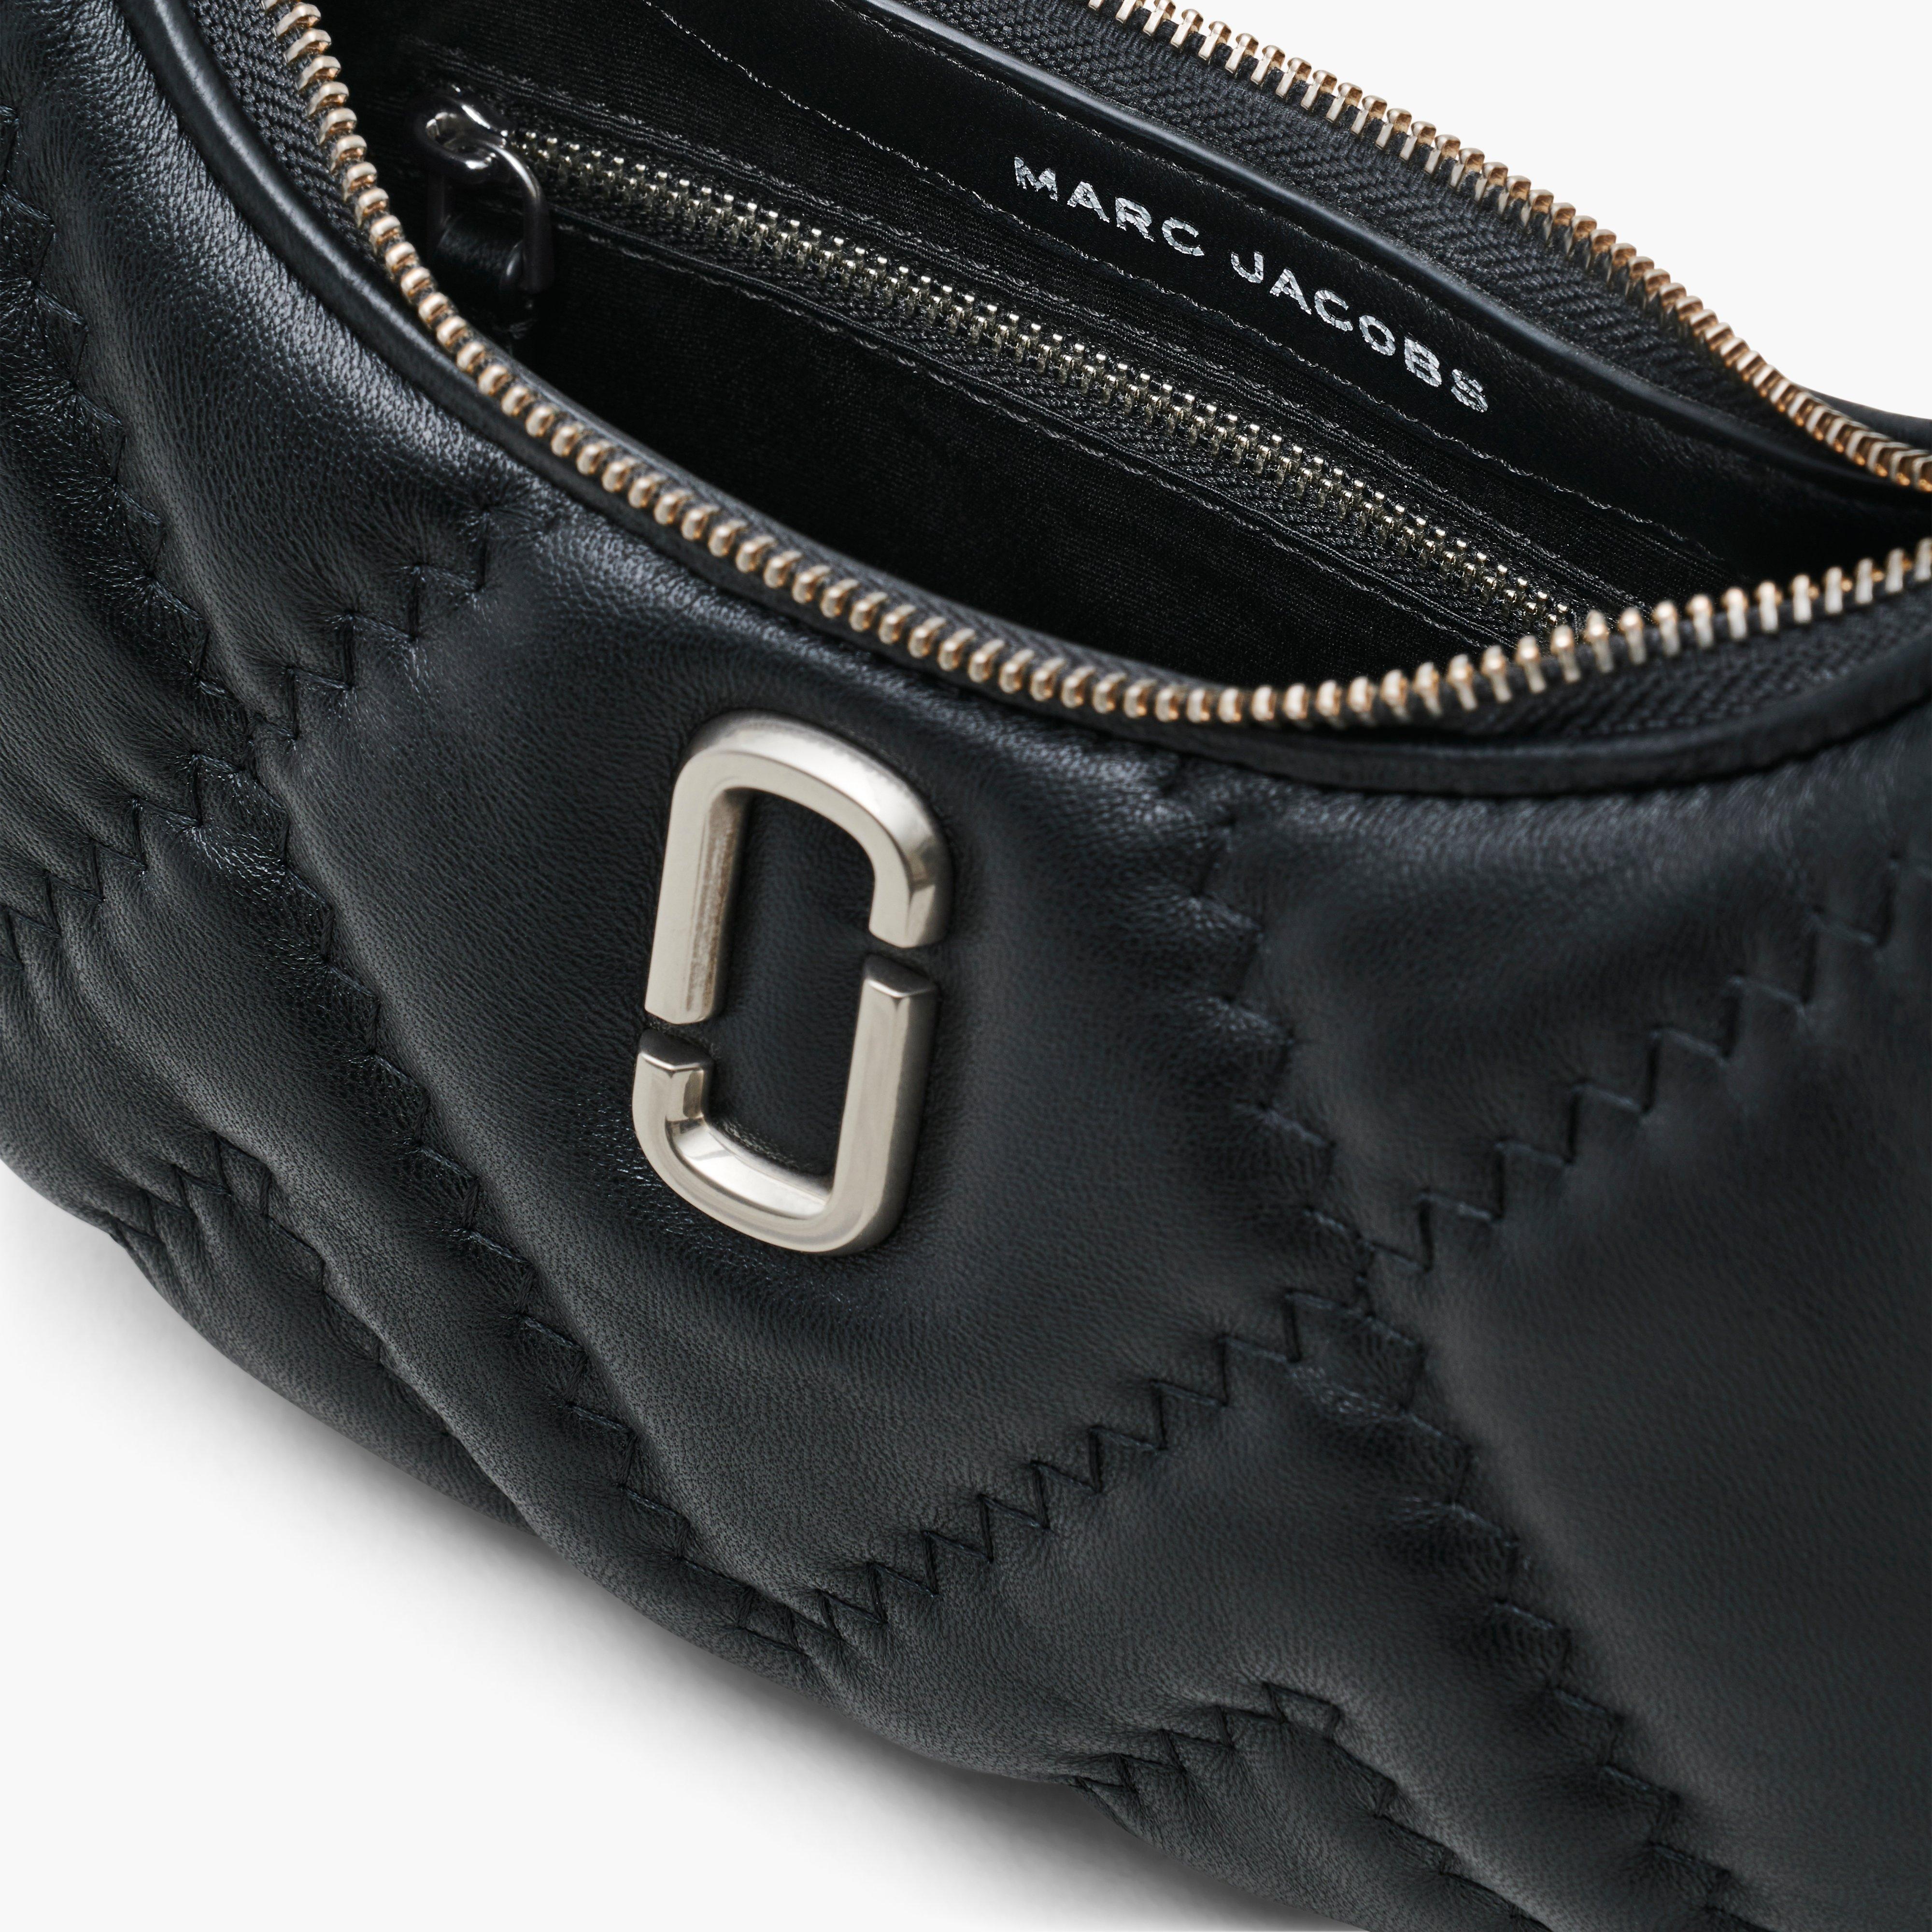 THE QUILTED LEATHER J MARC CURVE BAG - 6